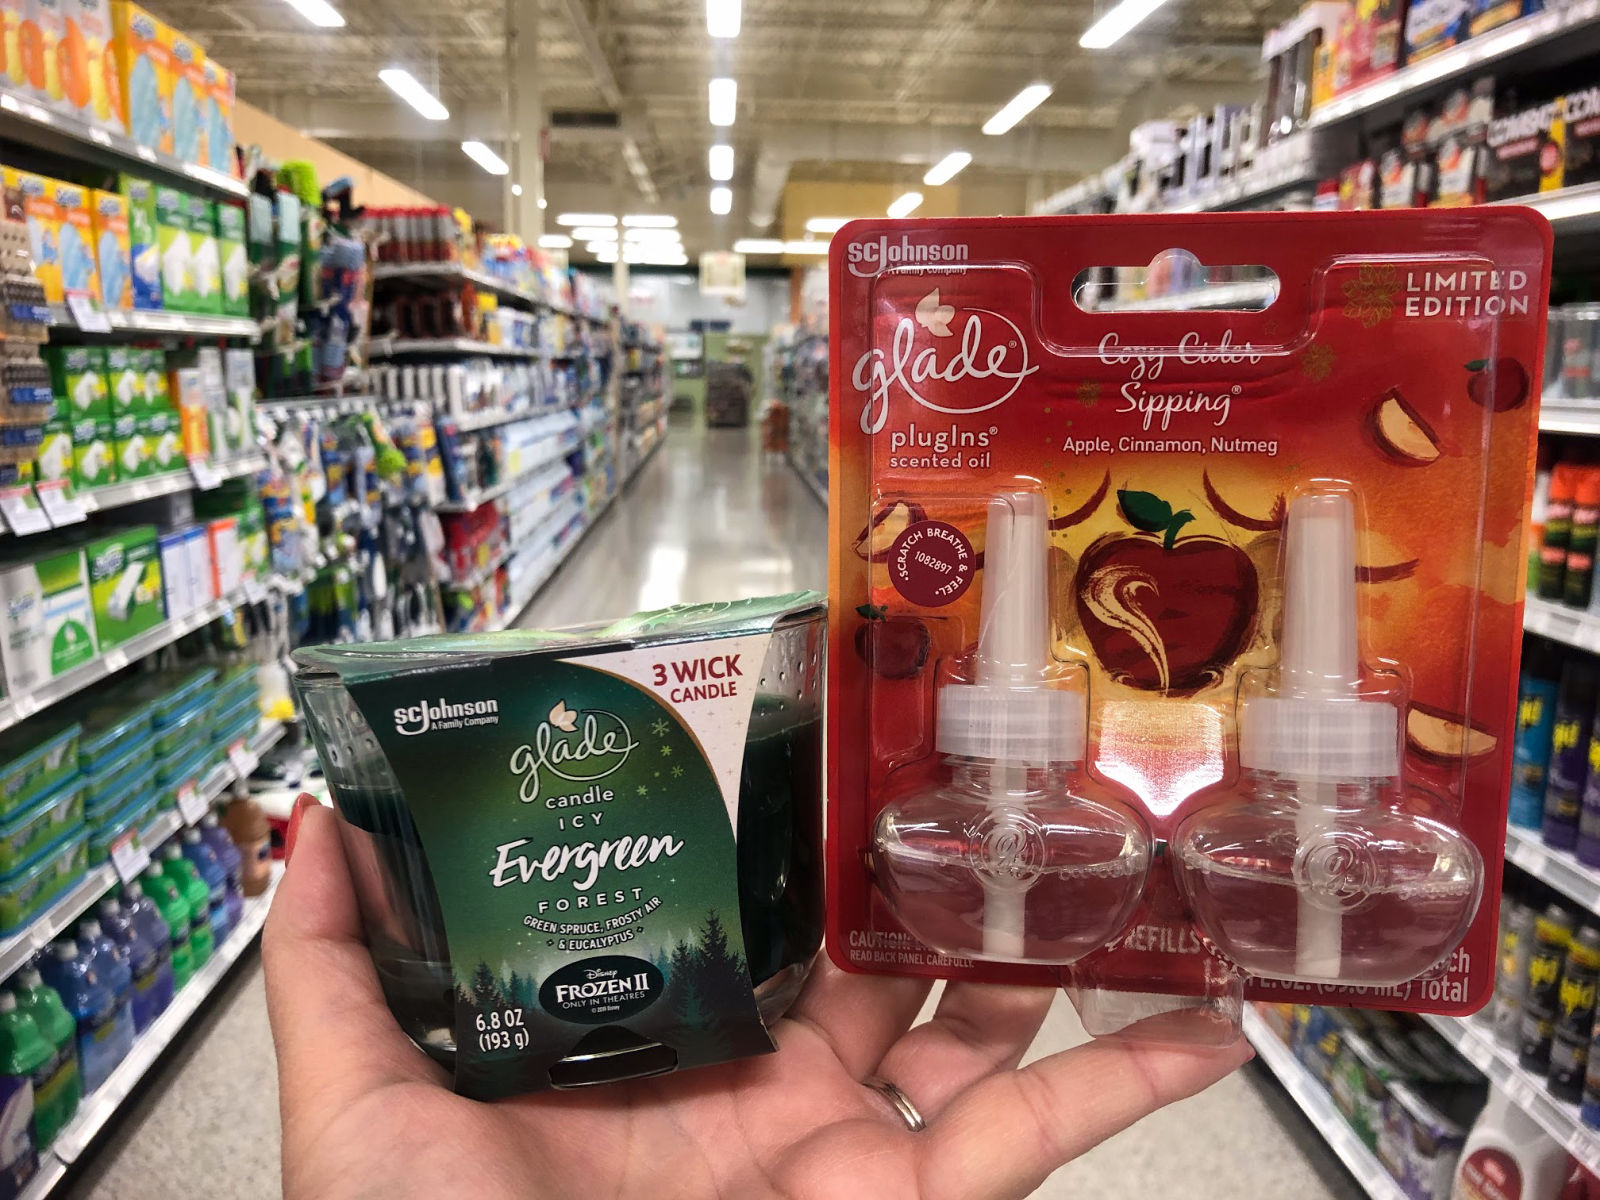 Bring Joy To Your Home With Glade® Limited Edition Holiday Collection Fragrances - Save Now At Your Local Publix! on I Heart Publix